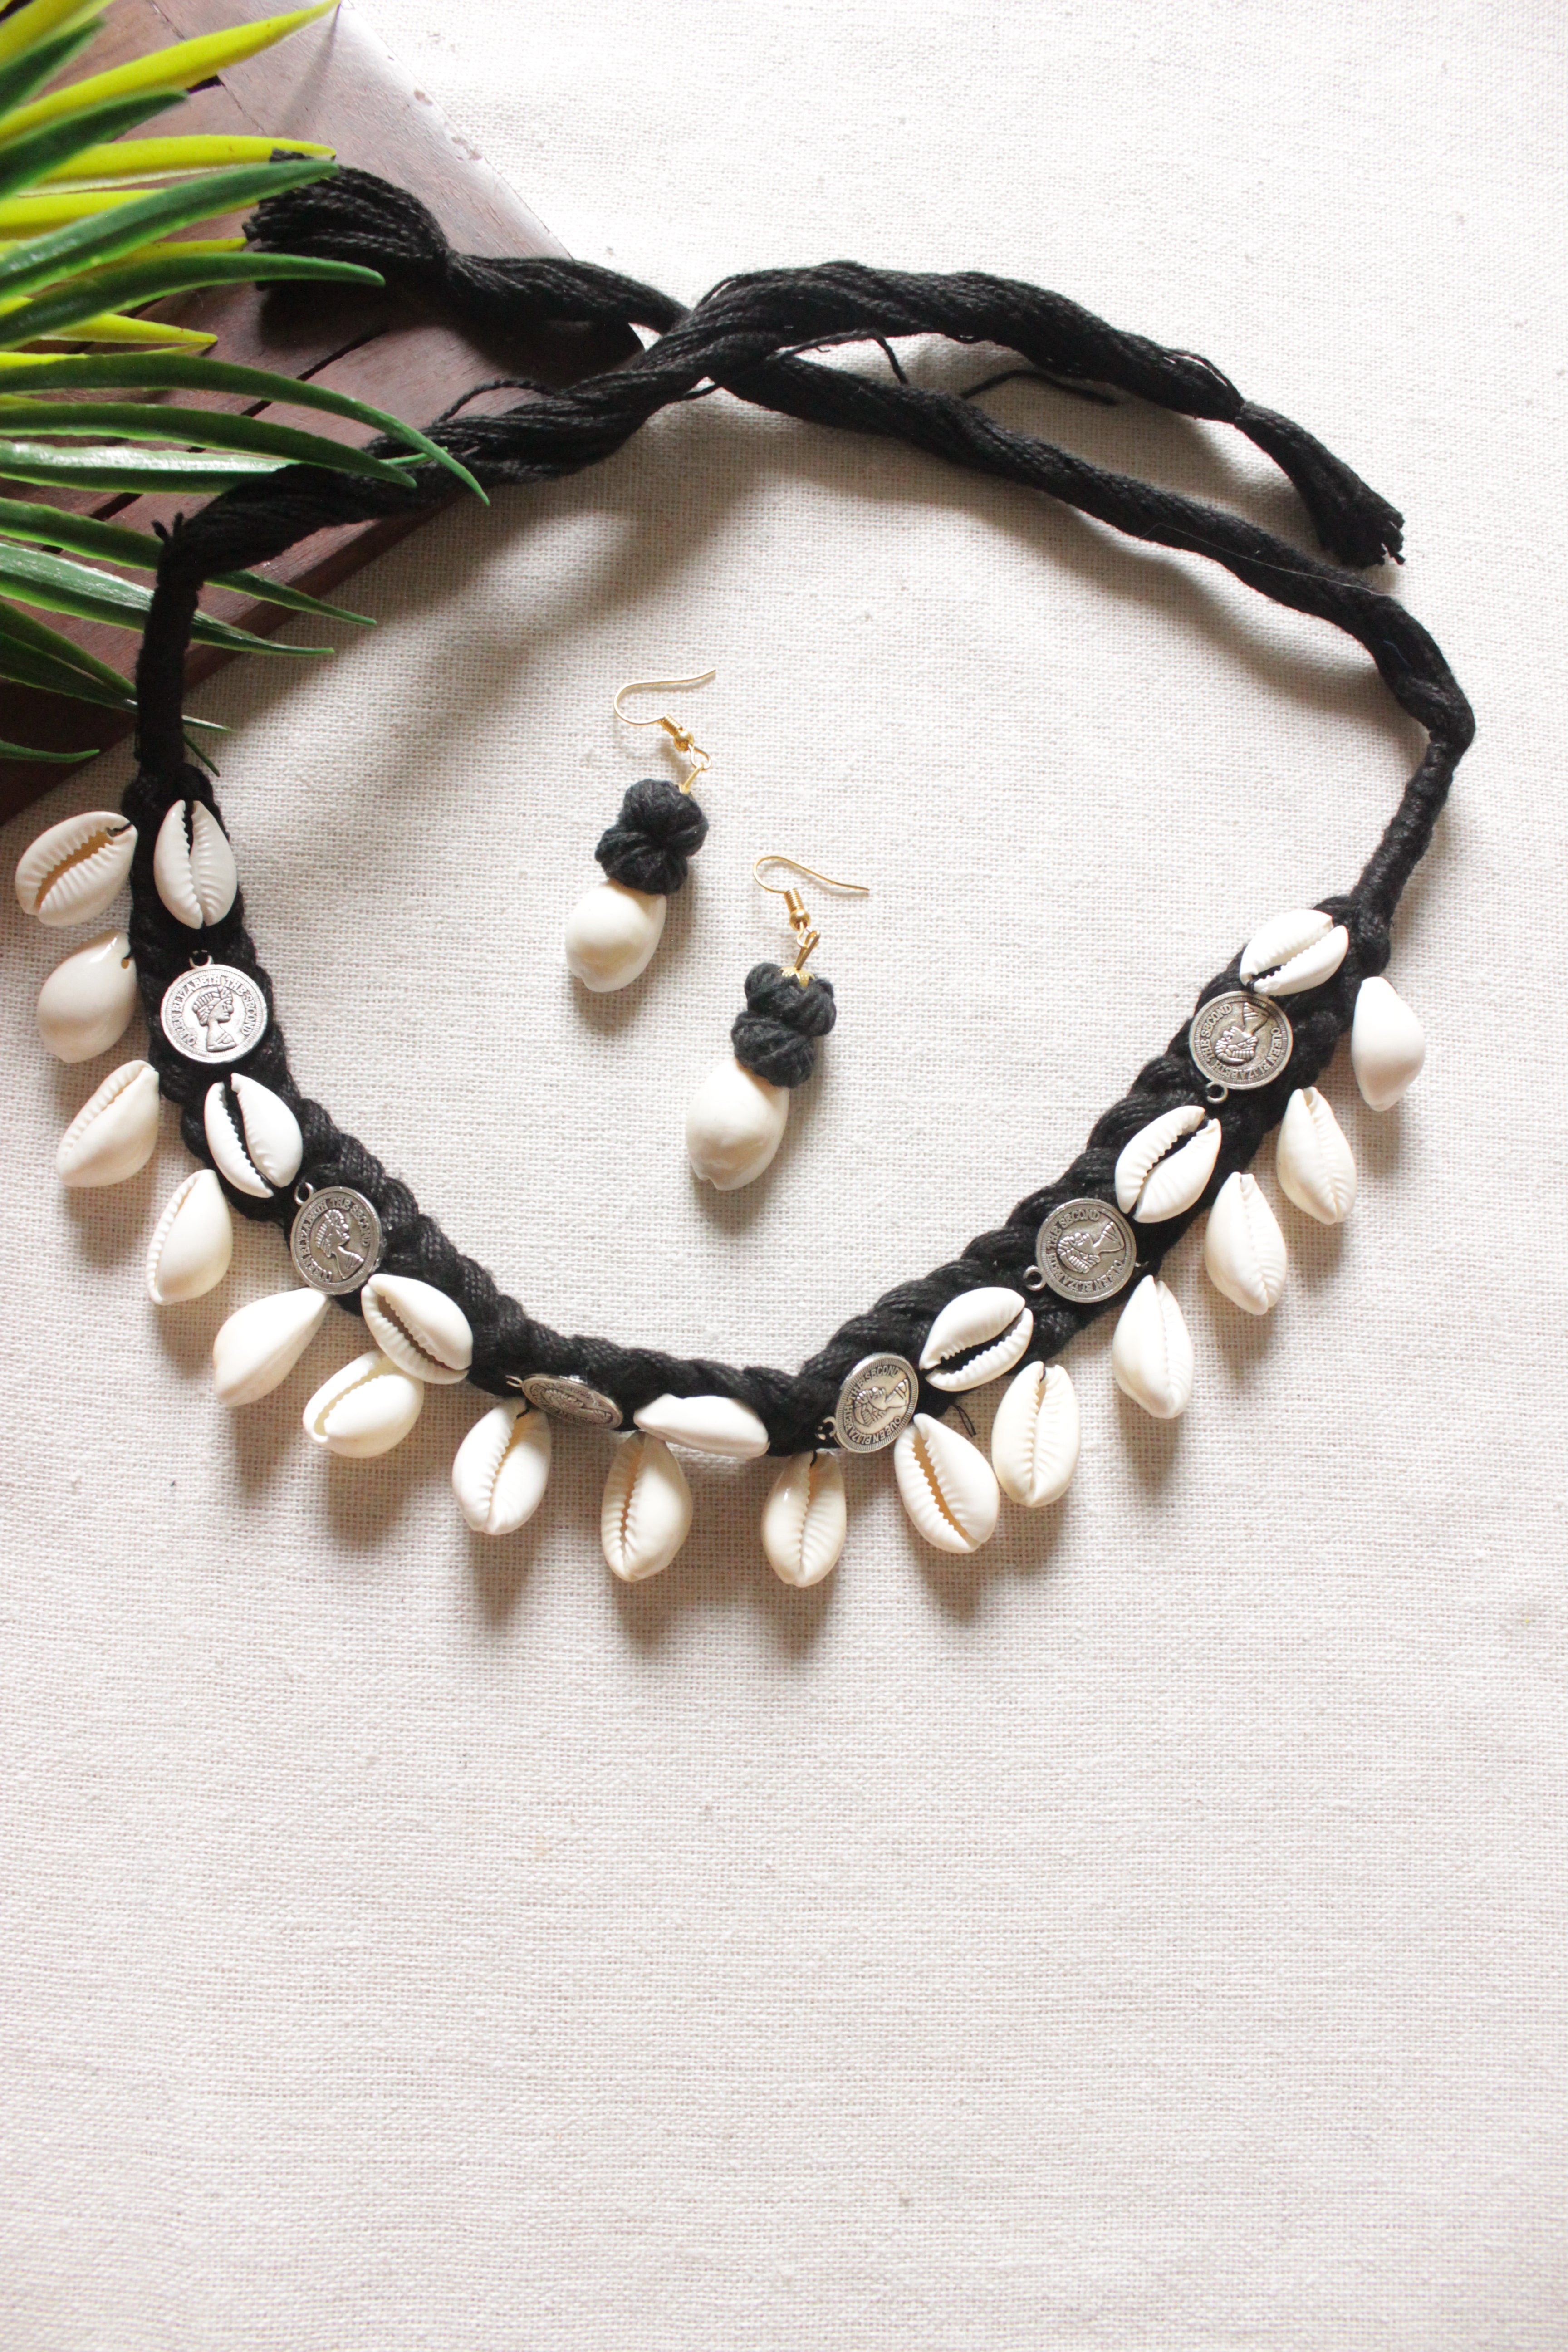 Black Braided Fabric Threads Choker Necklace Set with Shells and Stamped Coins